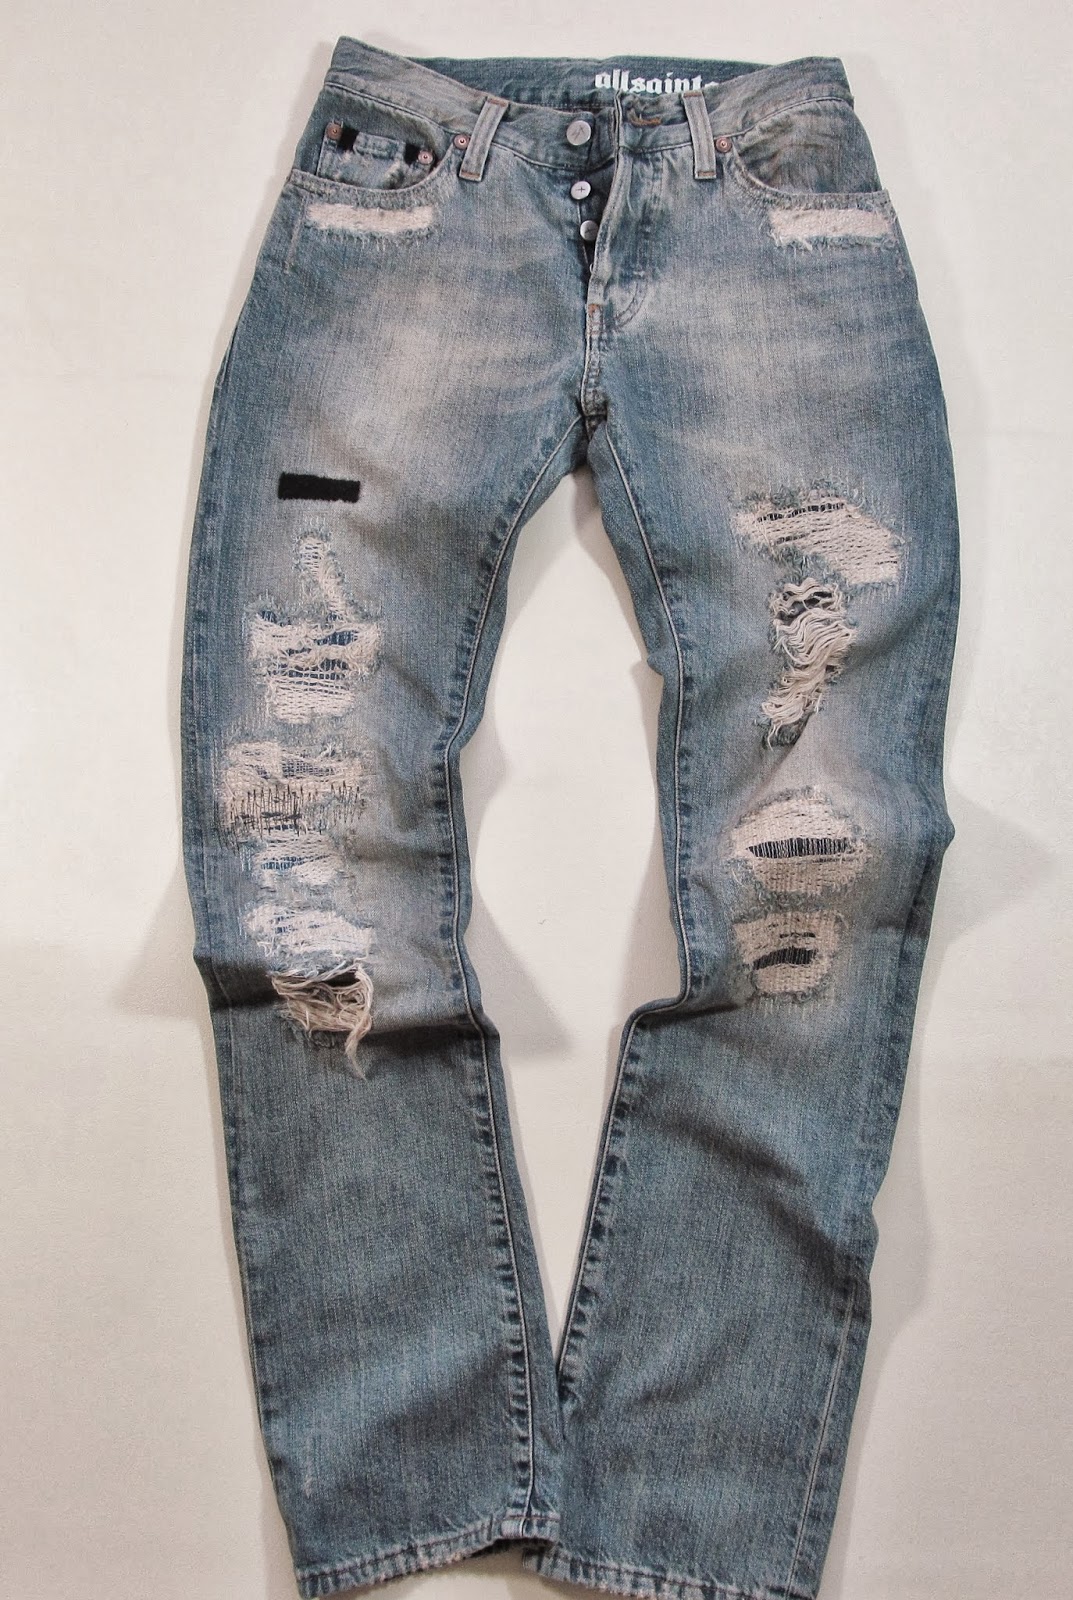 WOMENS ALL SAINTS JEANS GRUNGE DISTRESSED LOOK JEANS TROUSERS W28